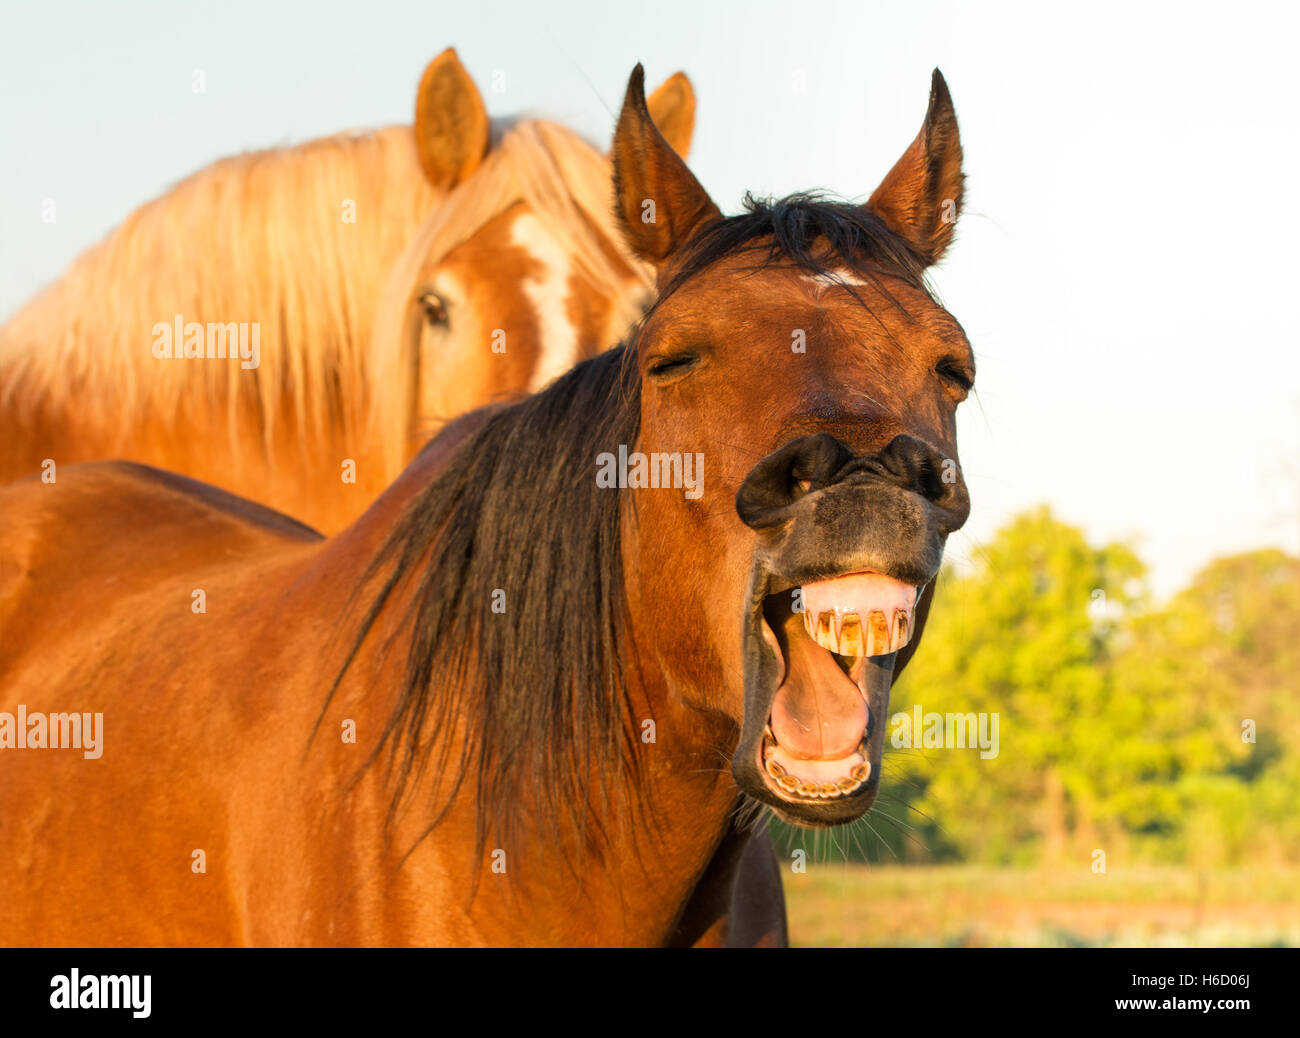 Red bay horse yawning, looking like he is laughing, with another horse on the background Stock Photo